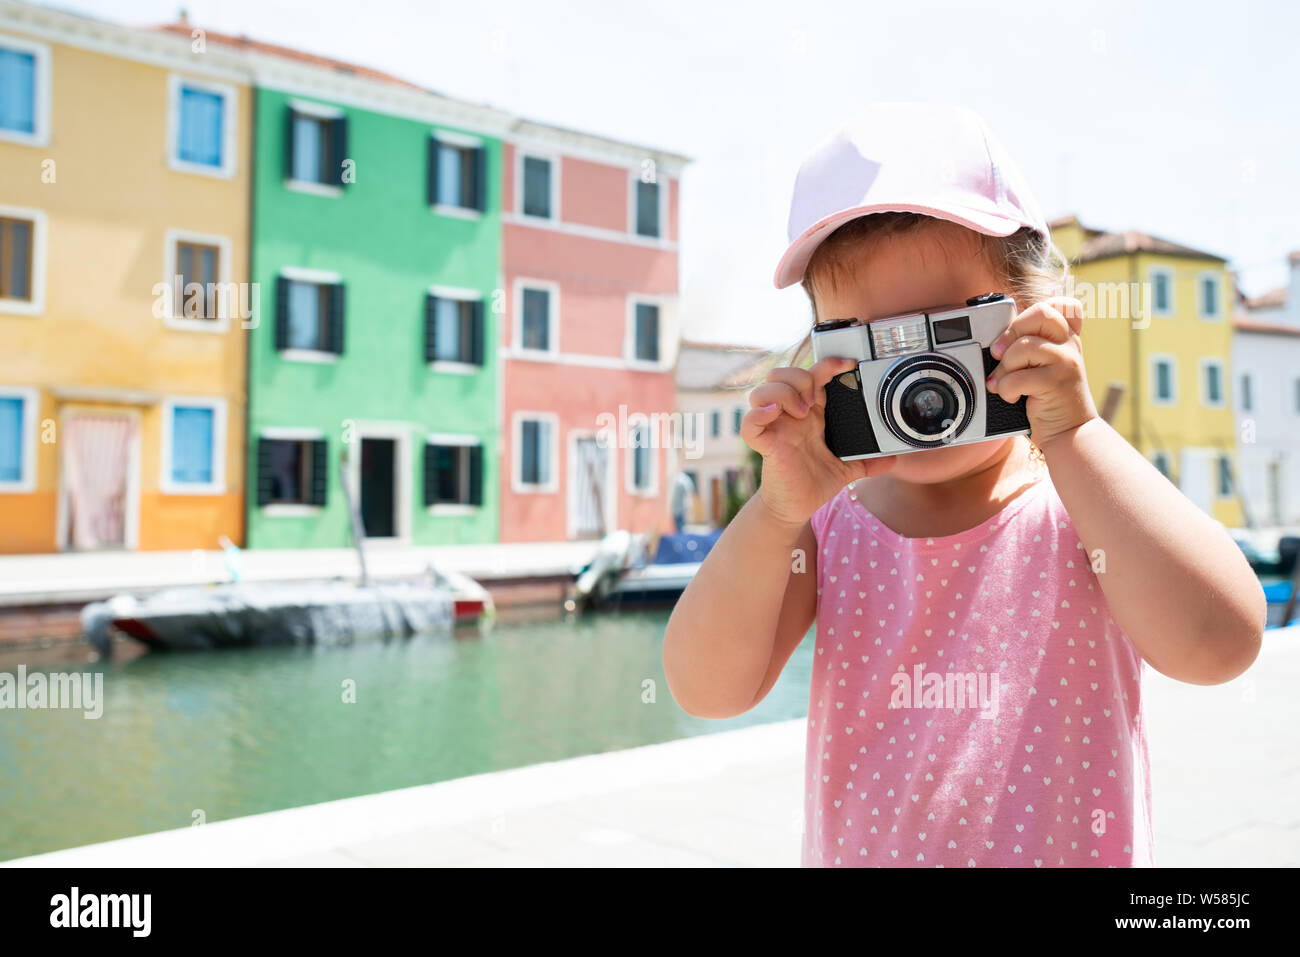 Little Girl Taking A Picture On Camera With Colorful Houses At Backdrop In Burano Island Stock Photo